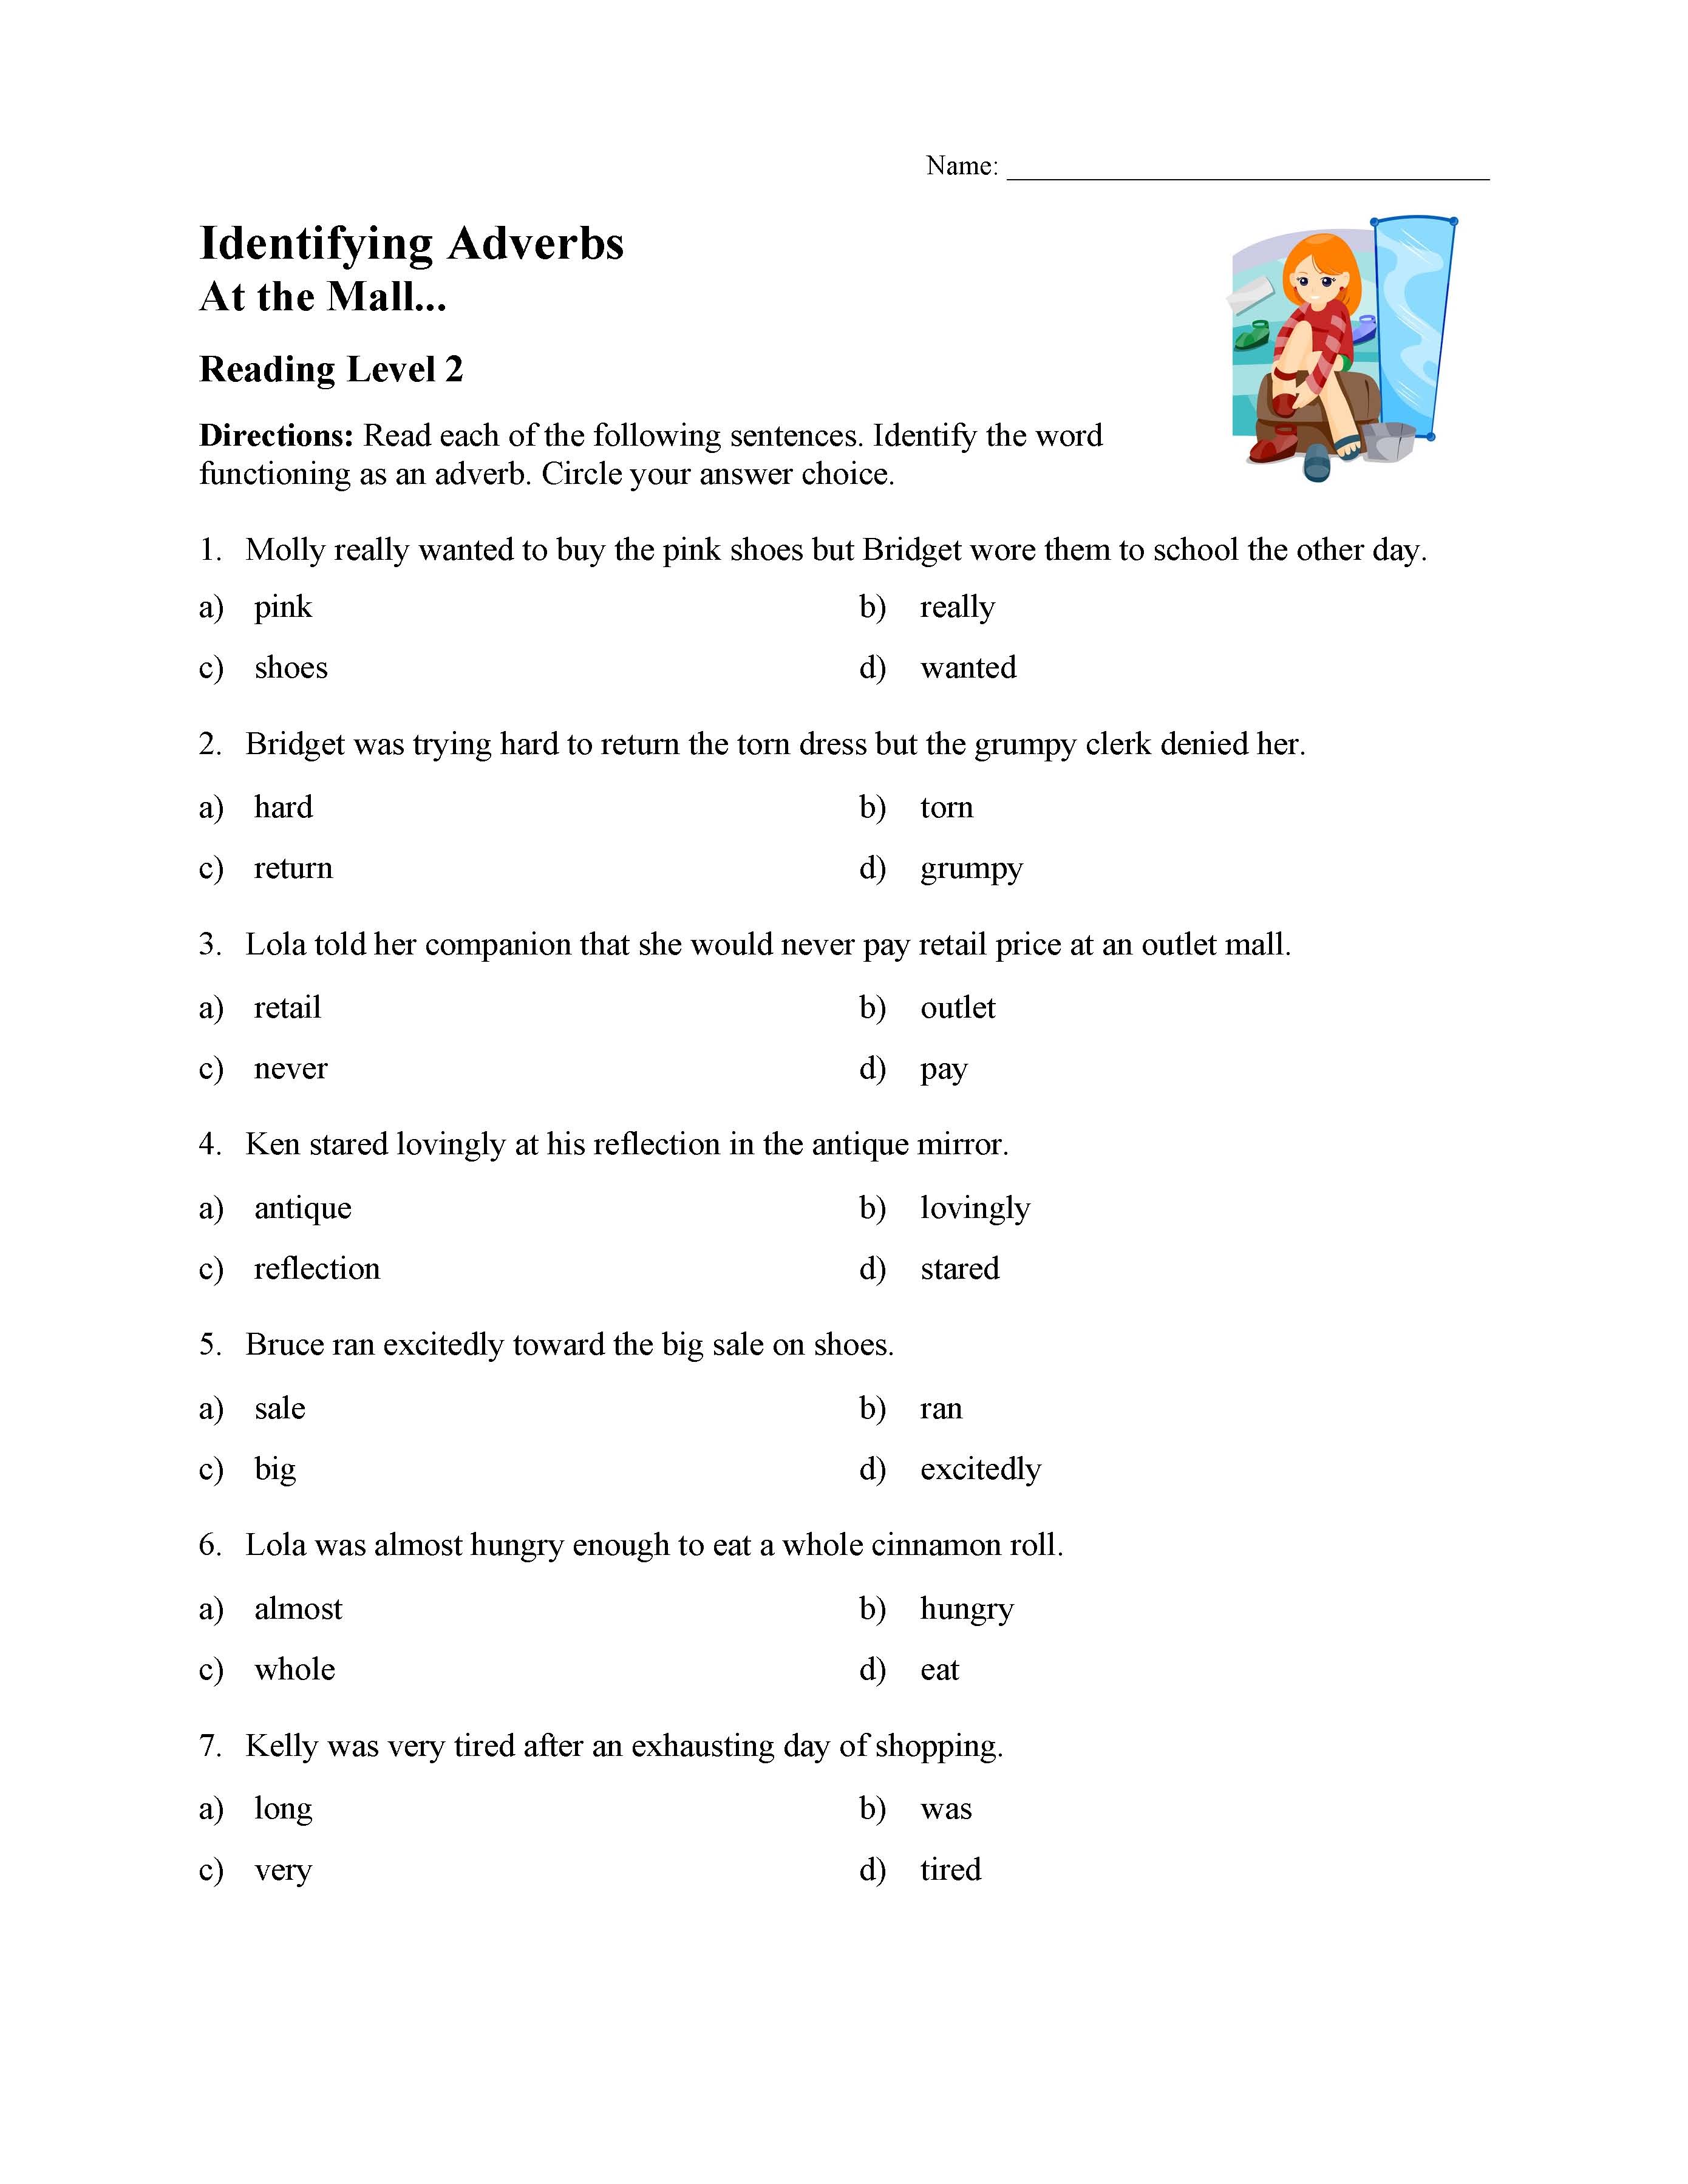 Identifying Adverbs Test Reading Level 2 Preview